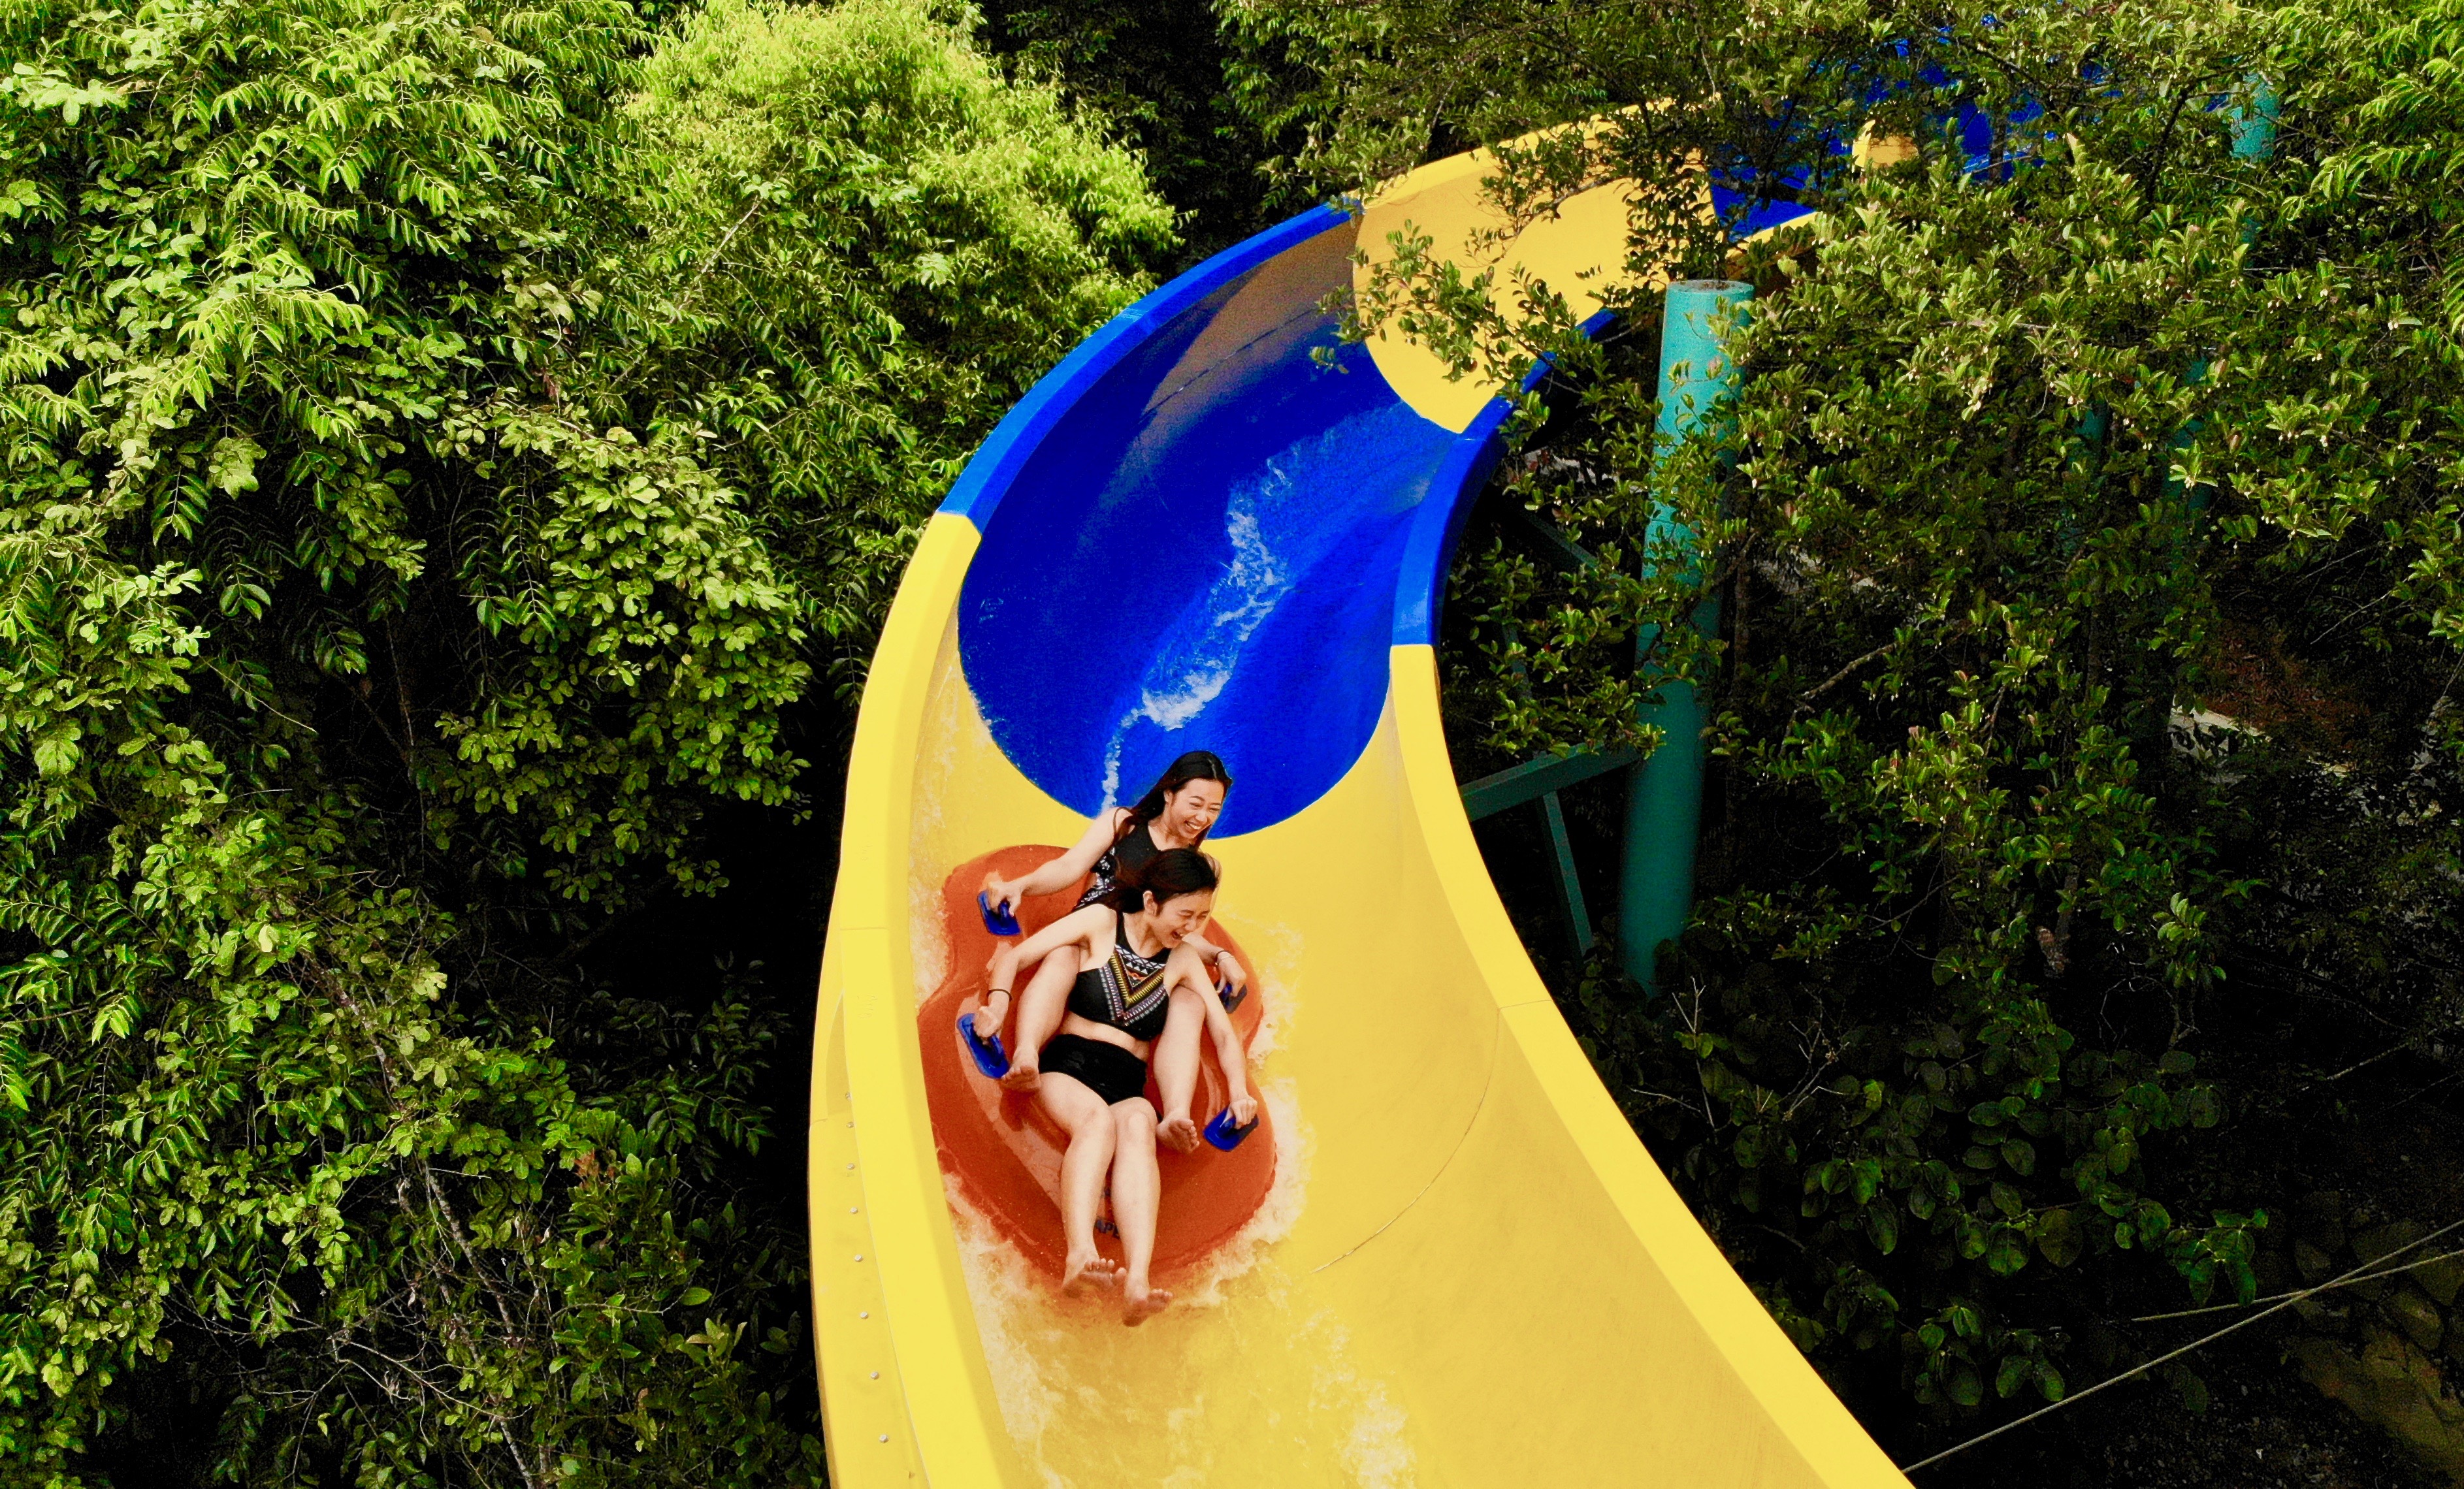 The longest, tallest and wackiest water slides in the world!